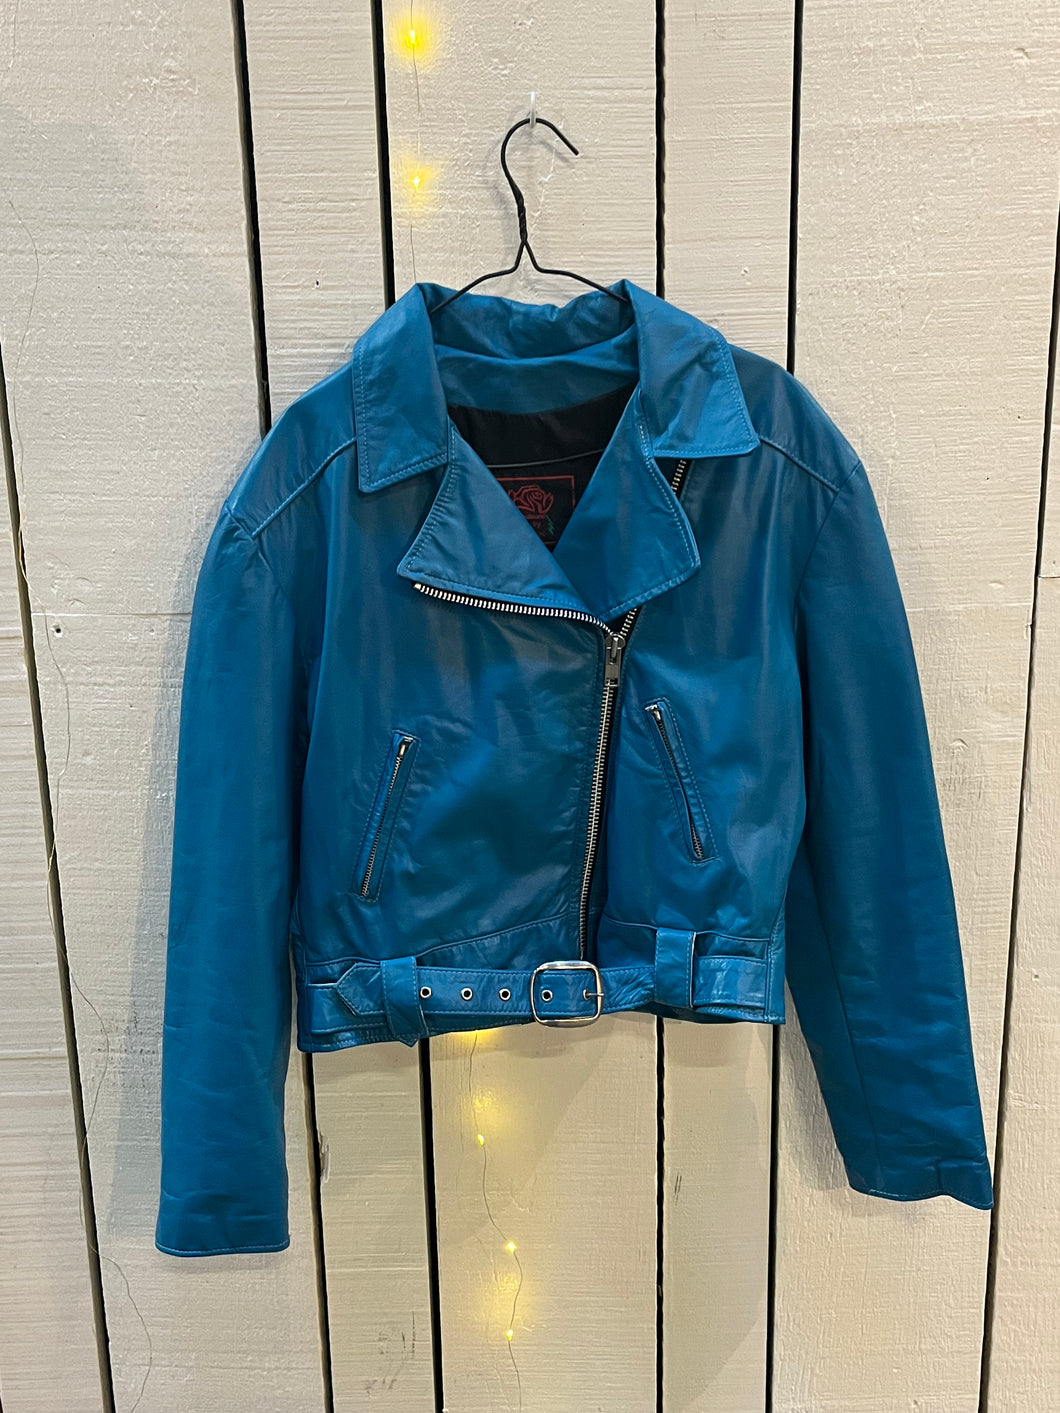 Vintage Fashions by Rose Teal Blue Leather Moto Jacket, Made in USA, Size 12